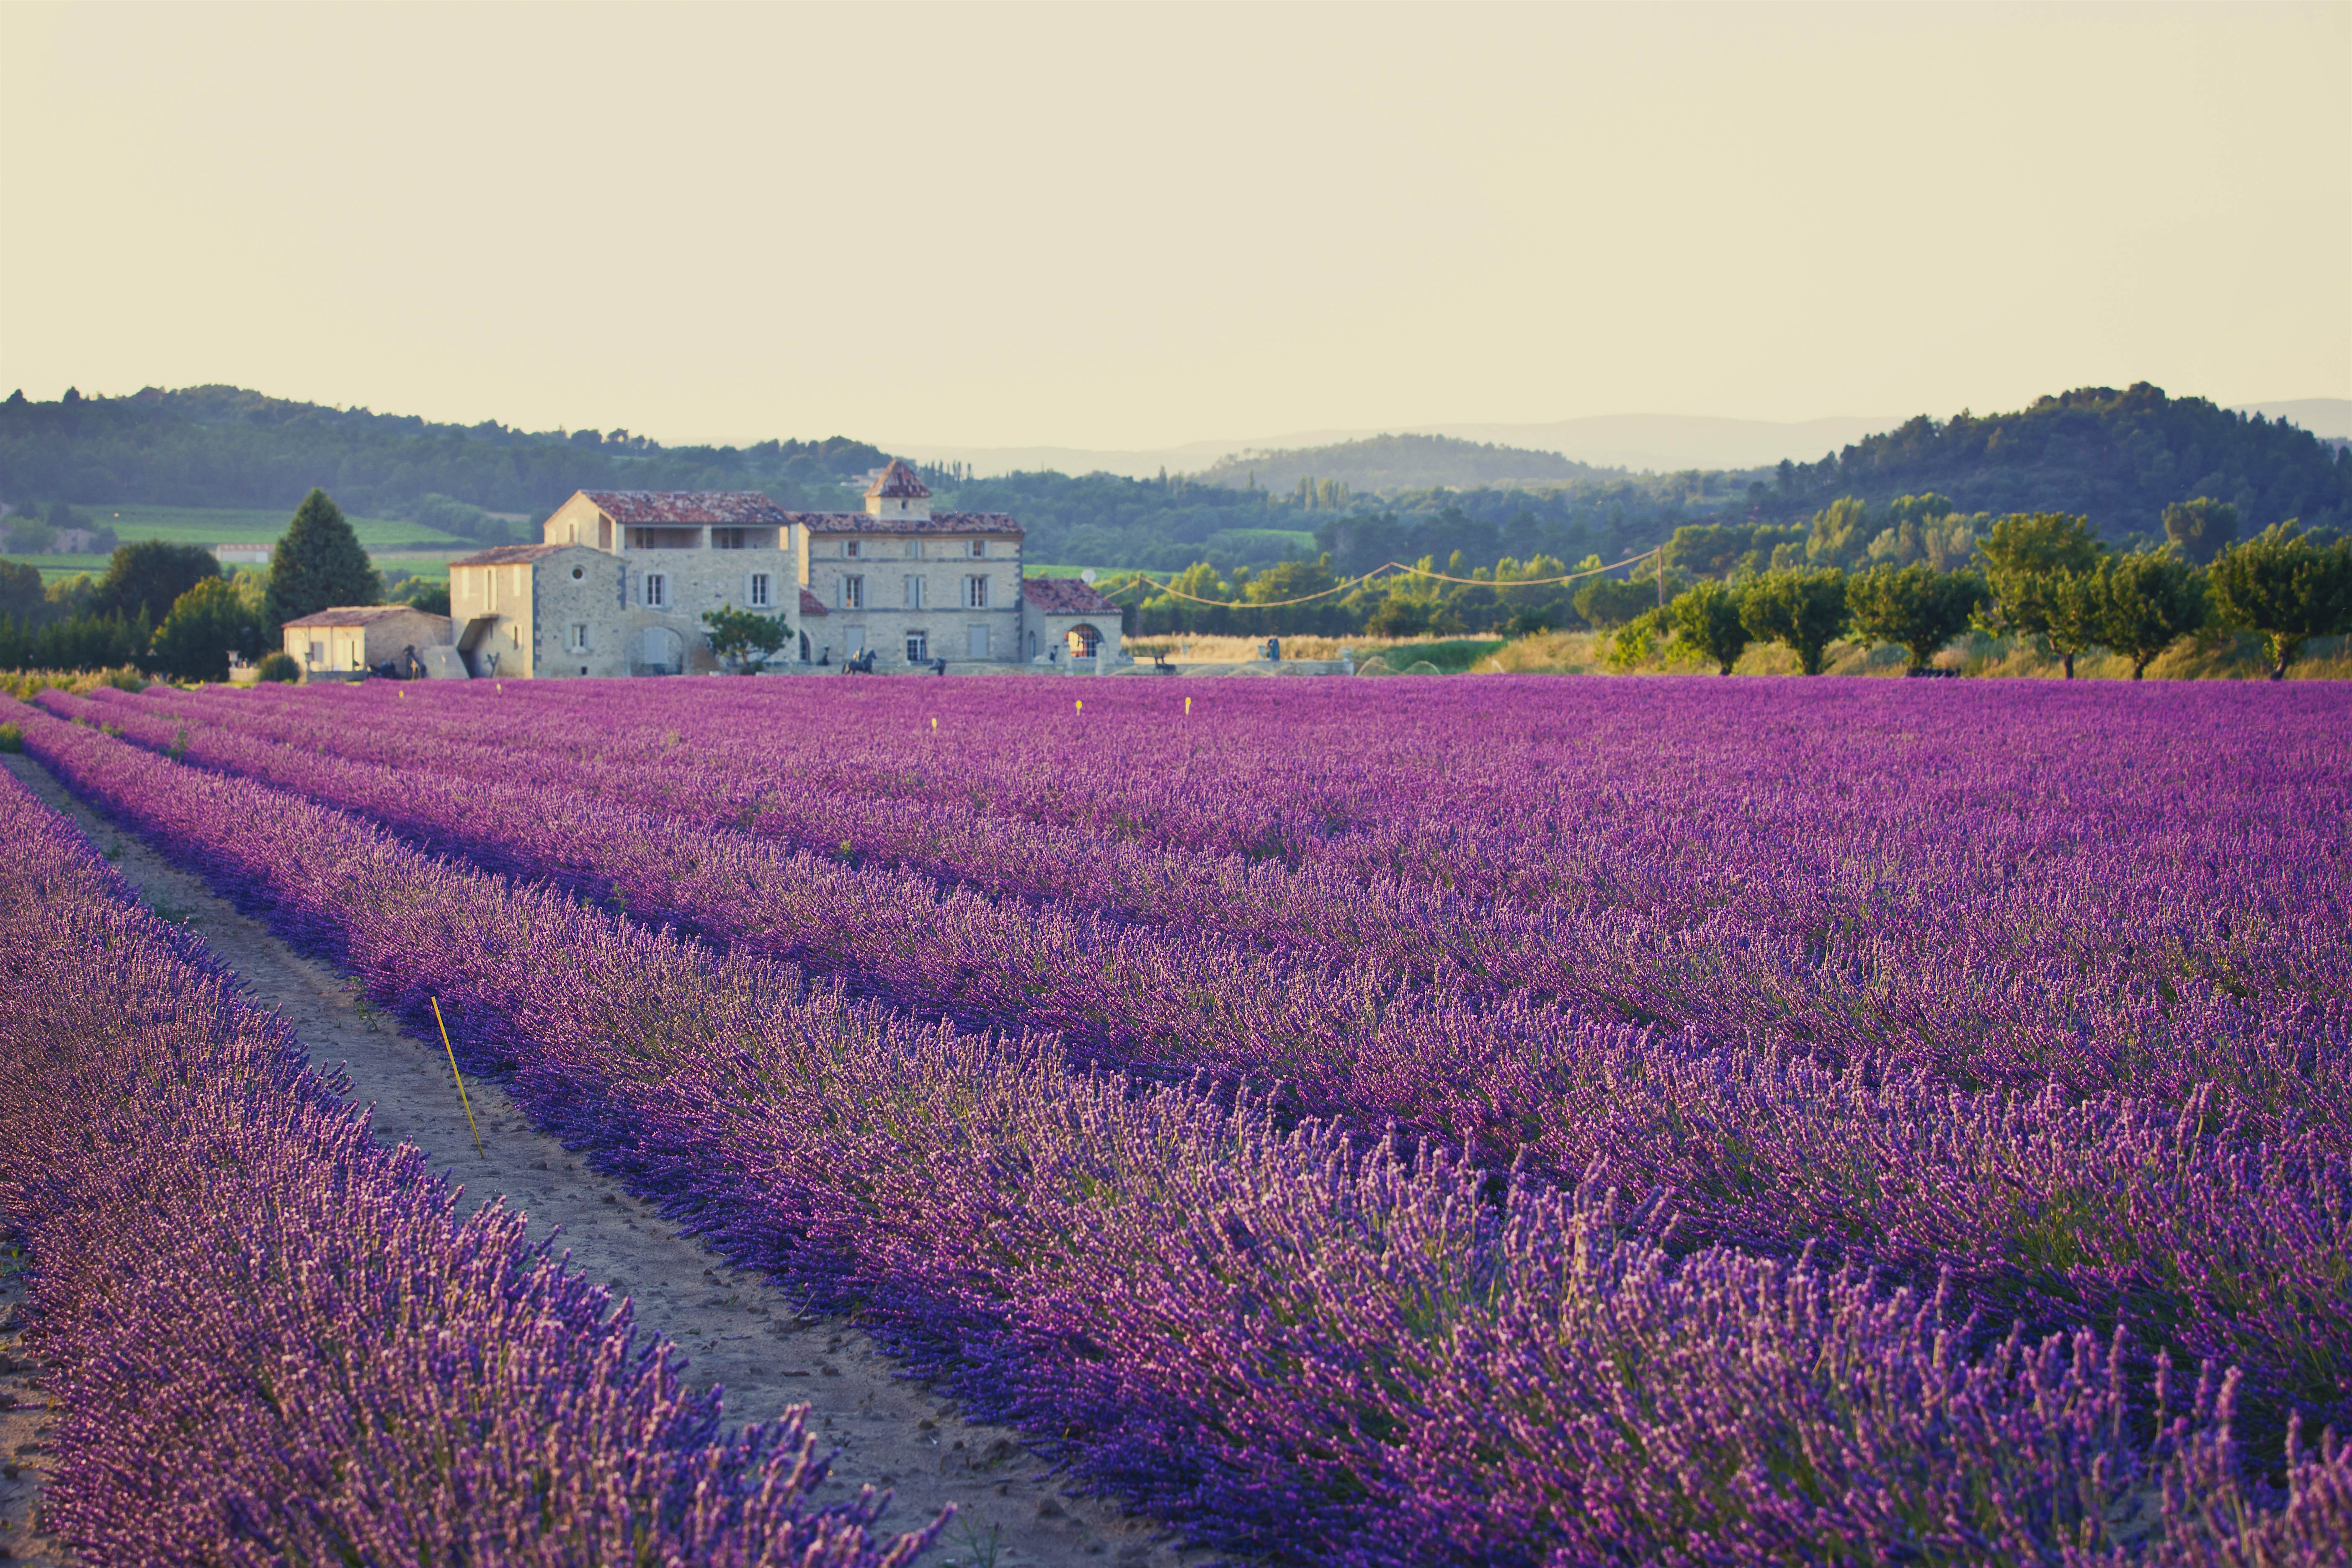 Provence & the Côte d'Azur travel | France - Lonely Planet